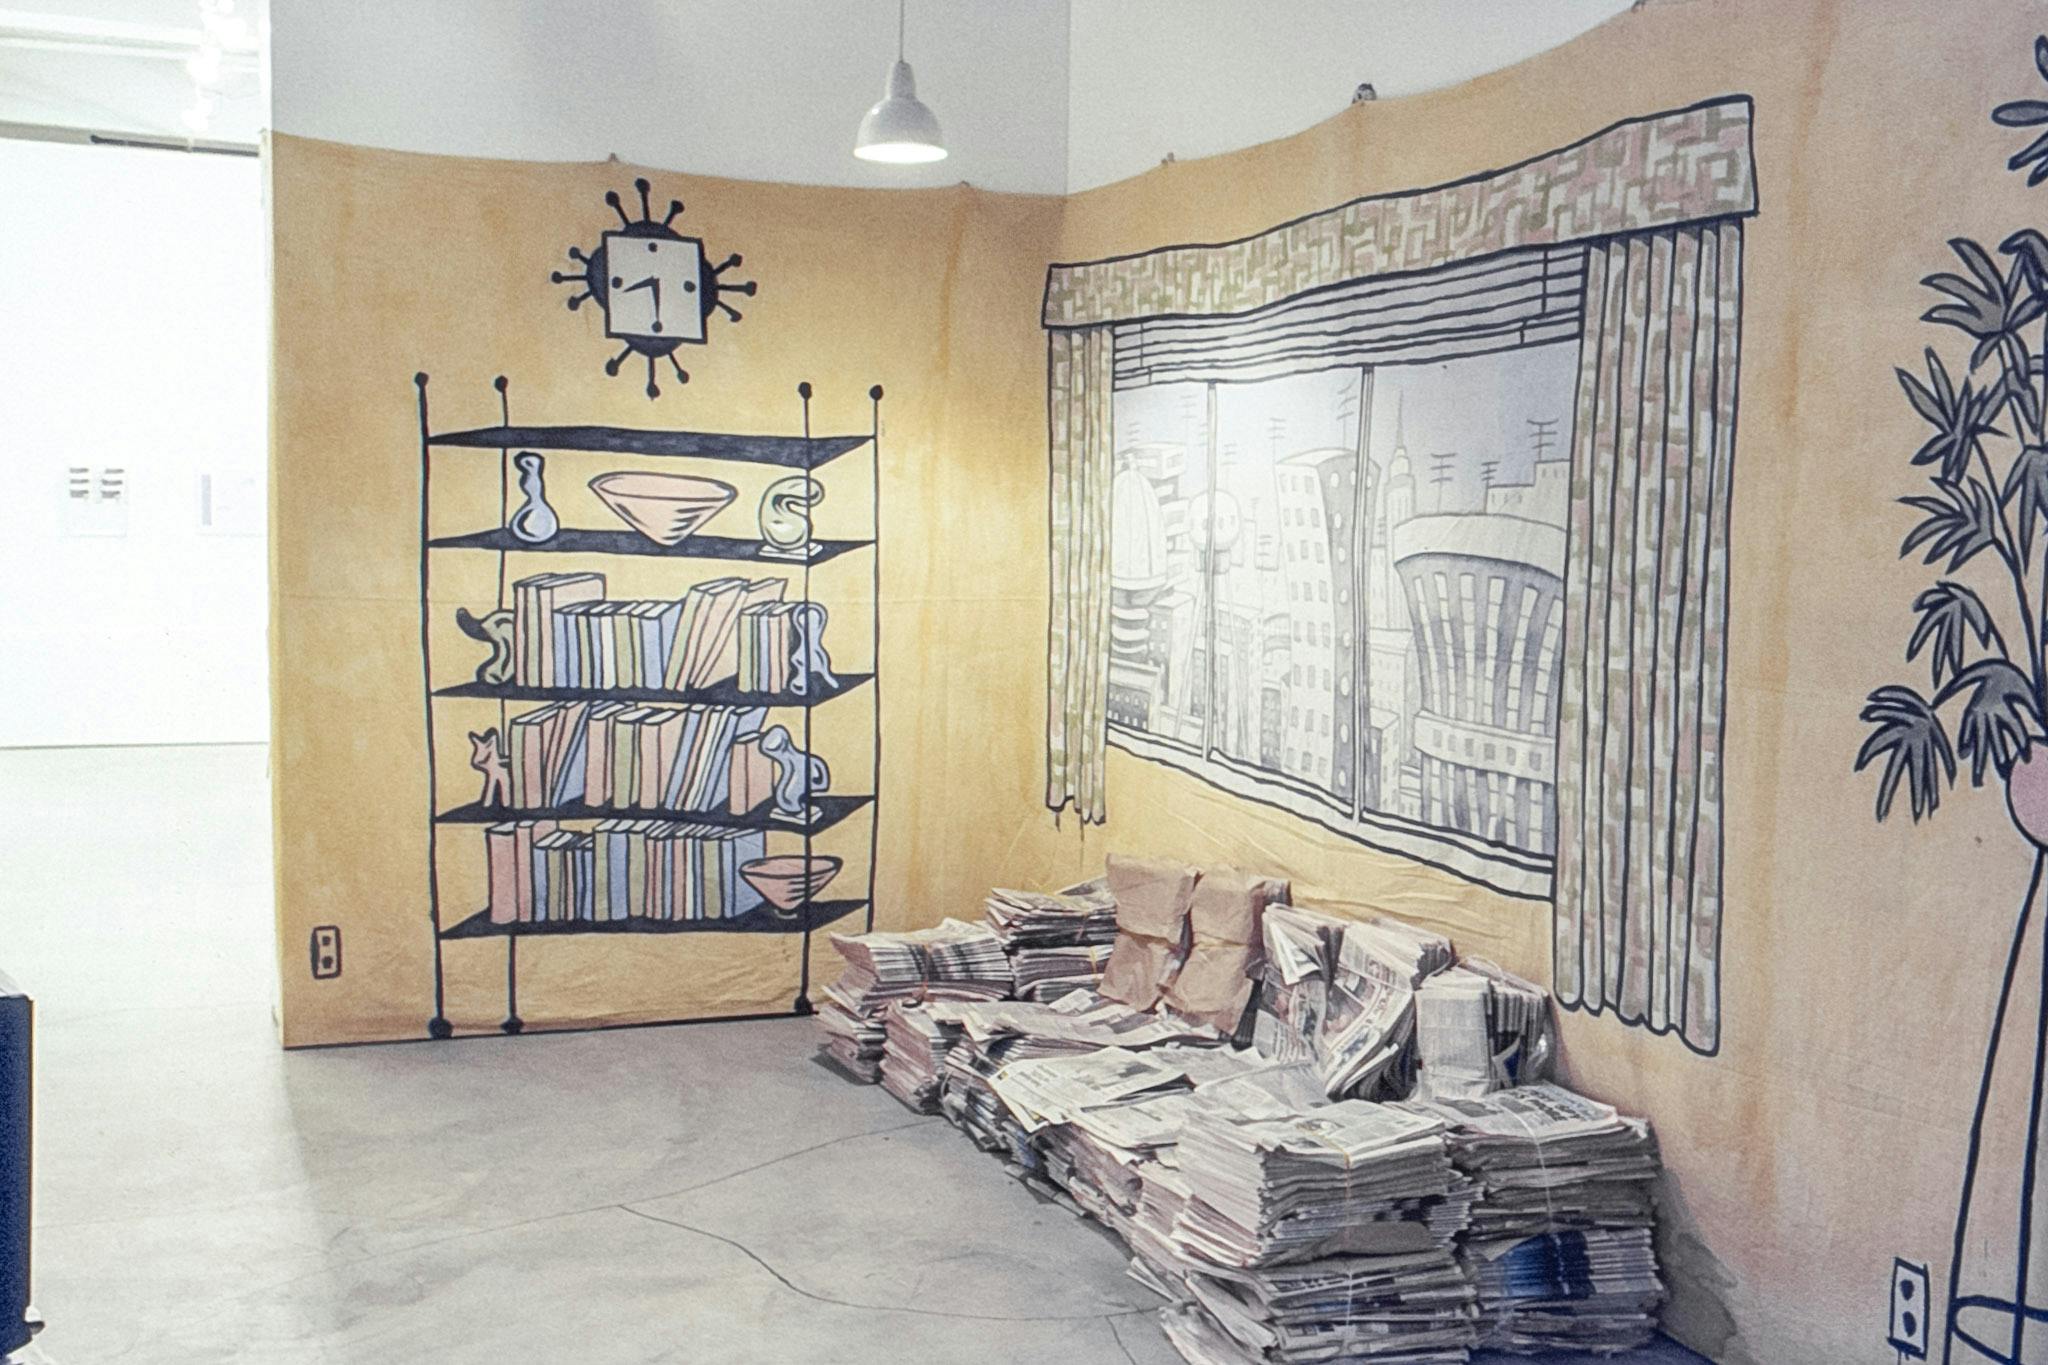 In the corner of a gallery, there is a large piece of fabric painted as a home (with a window, bookshelf, and plant stand) hung on the wall. At the base of the wall, stacks of newspaper form a couch. 